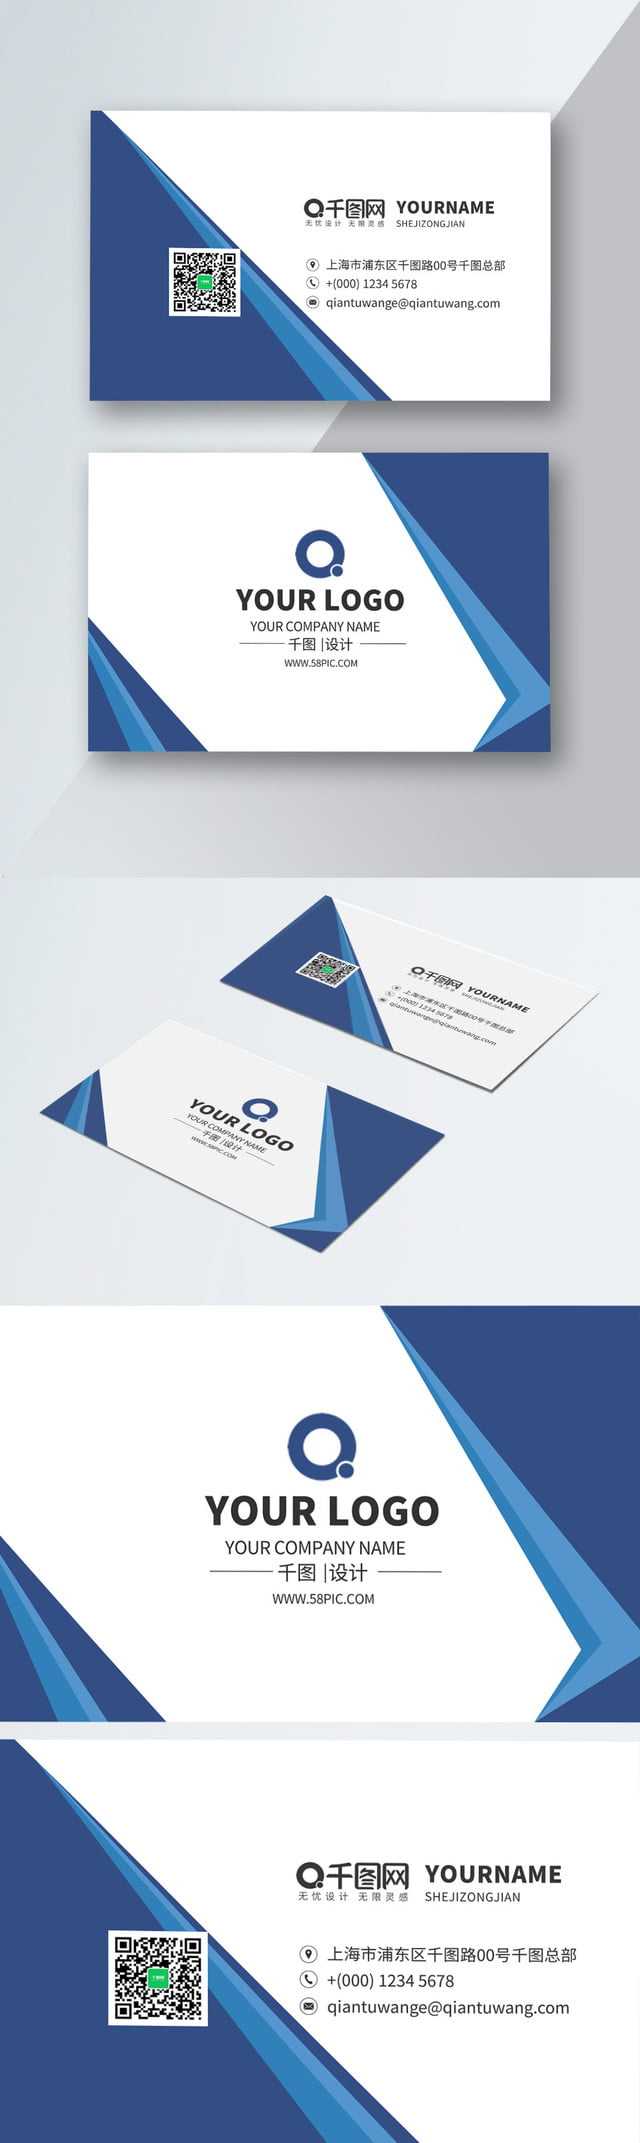 Printing Advertising Business Card Vector Material Printing For Advertising Card Template